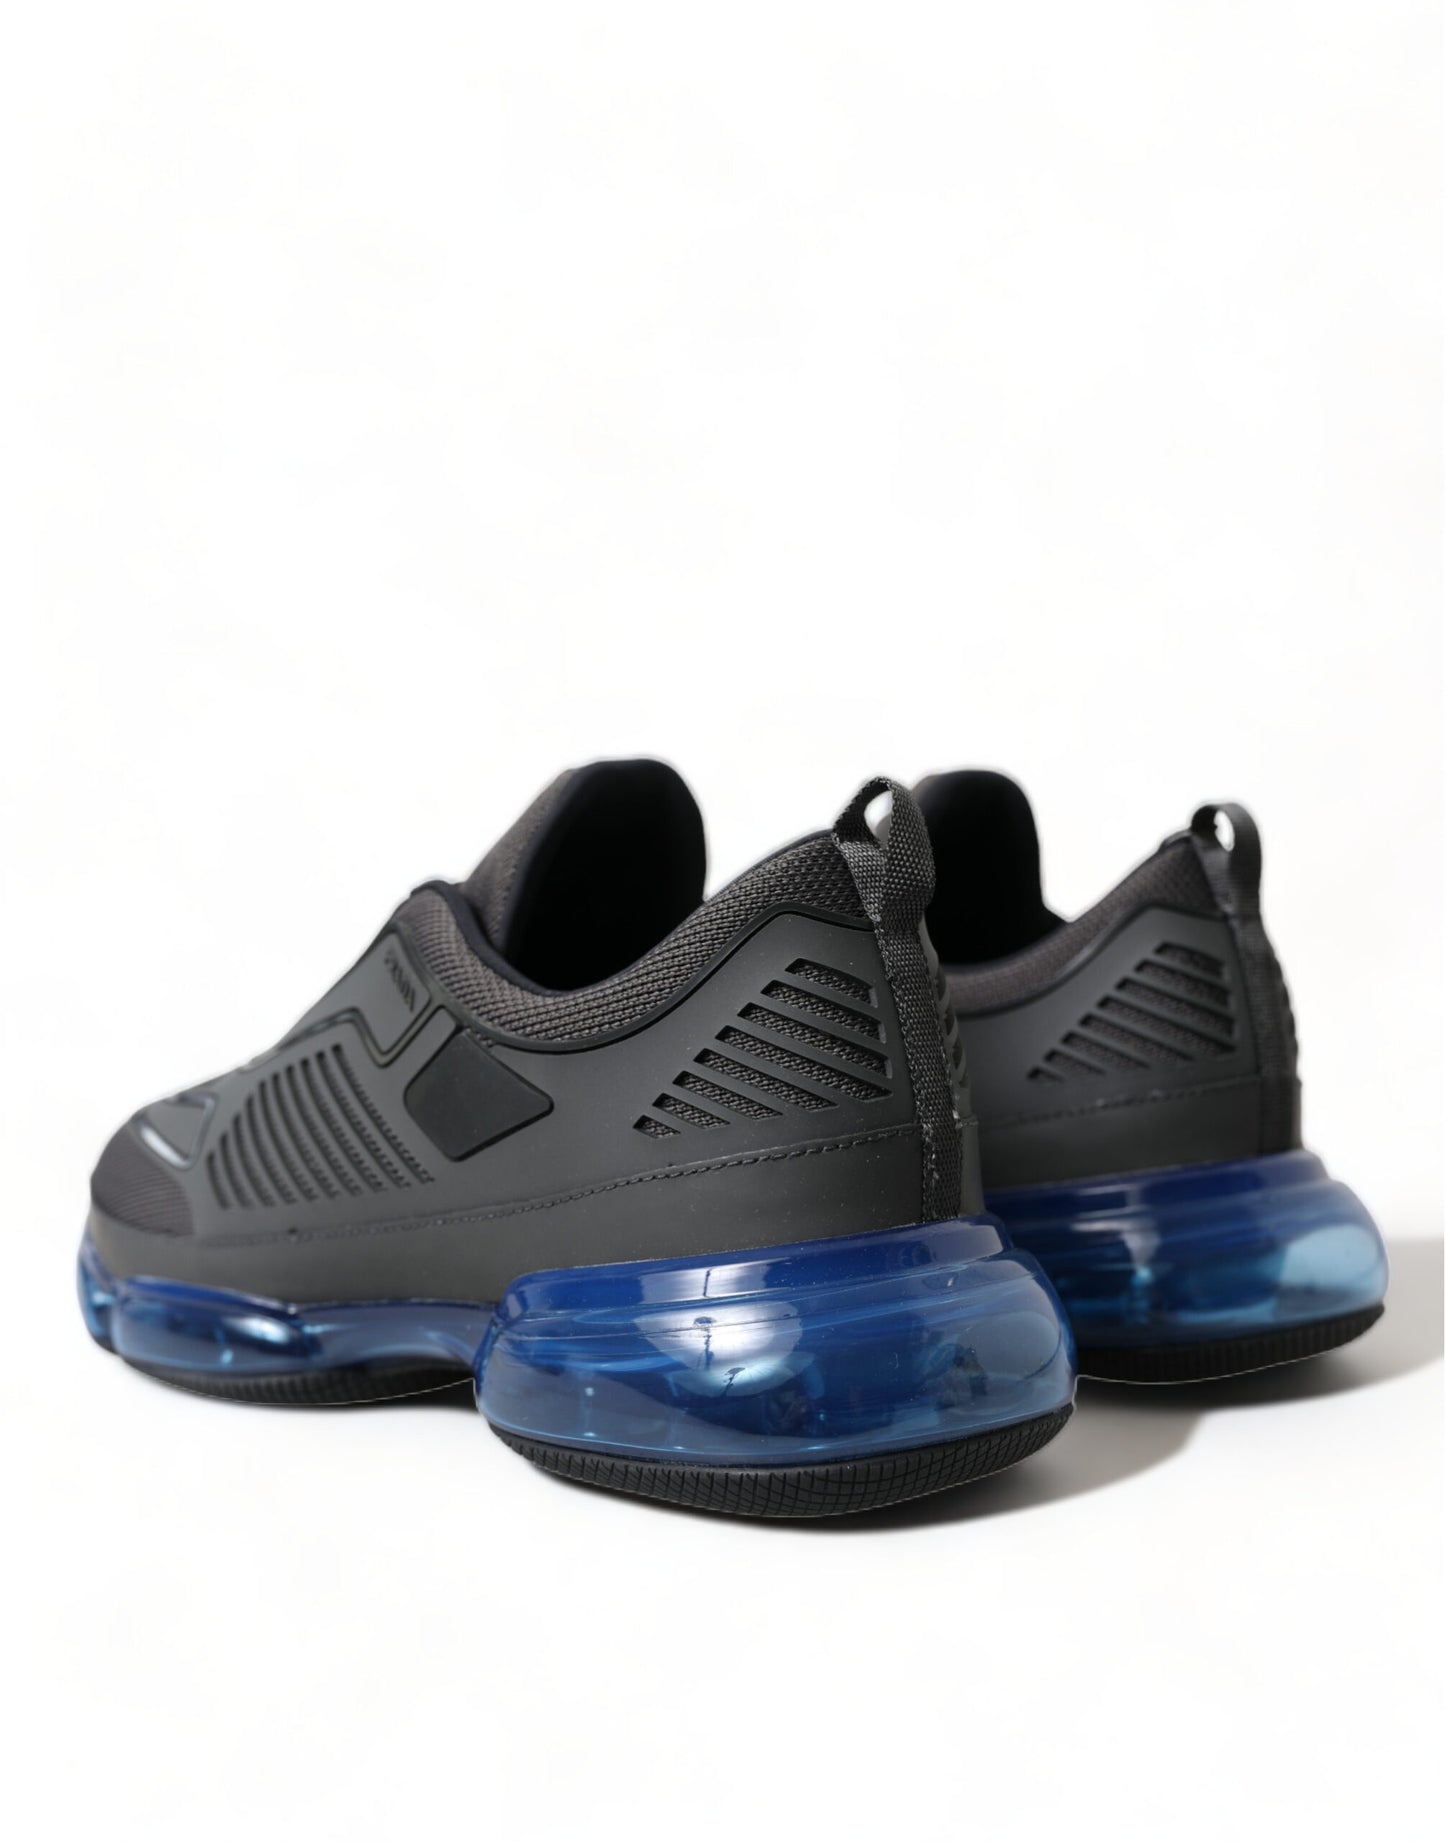 Black Blue Rubber Knit Slip On Low Top Sneakers Shoes